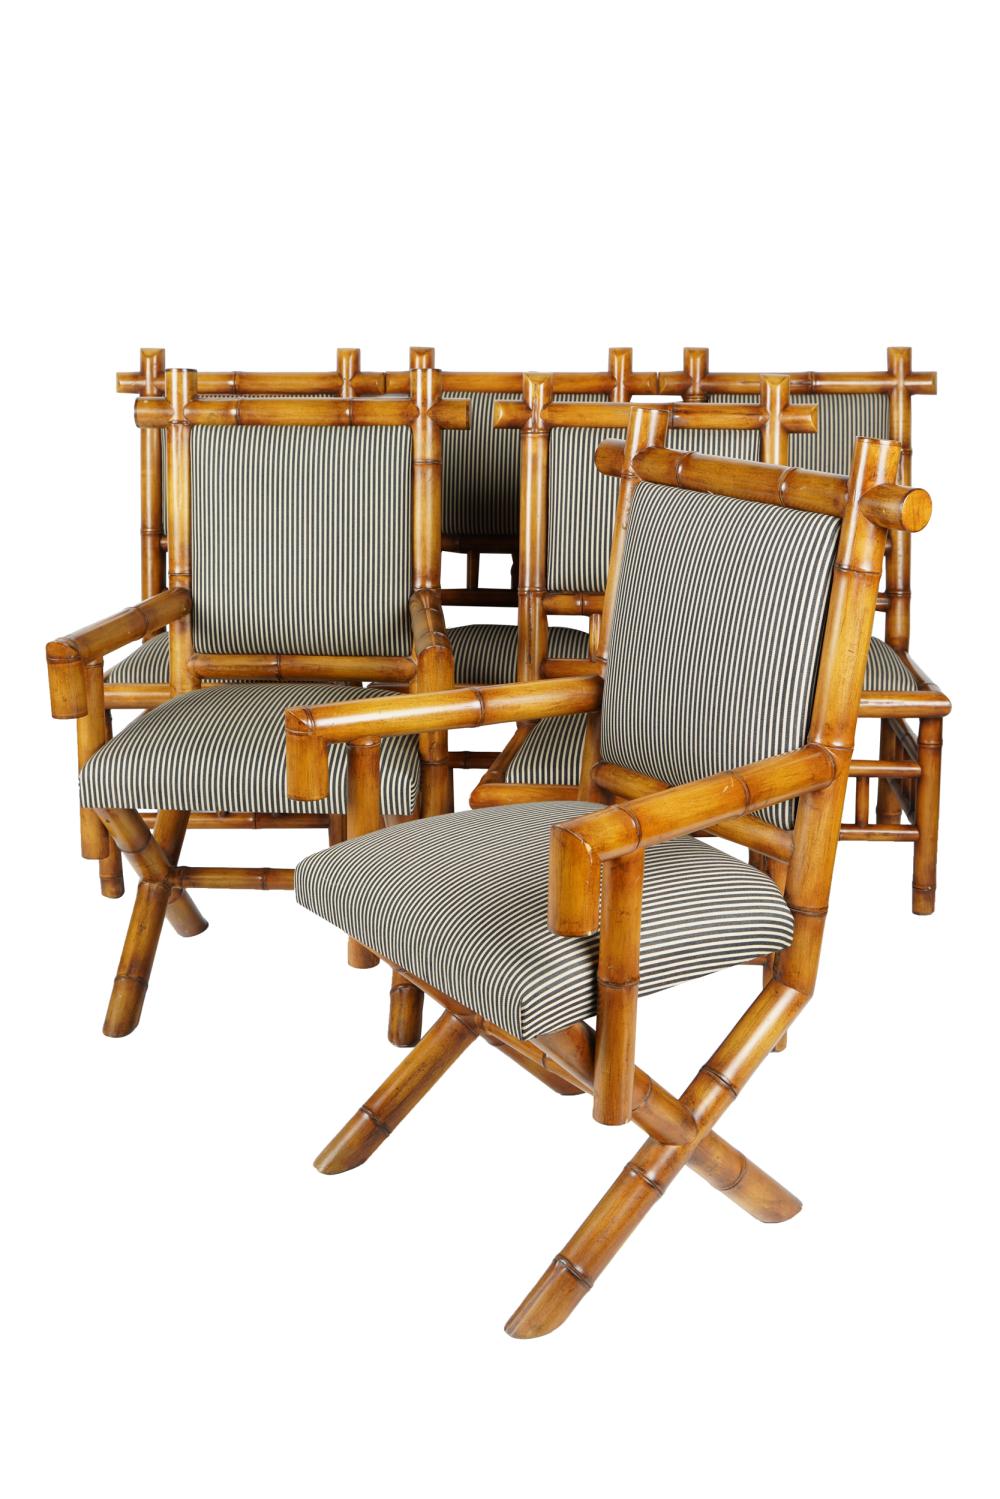 GROUP OF BAMBOO DINING CHAIRScomprising 33266c